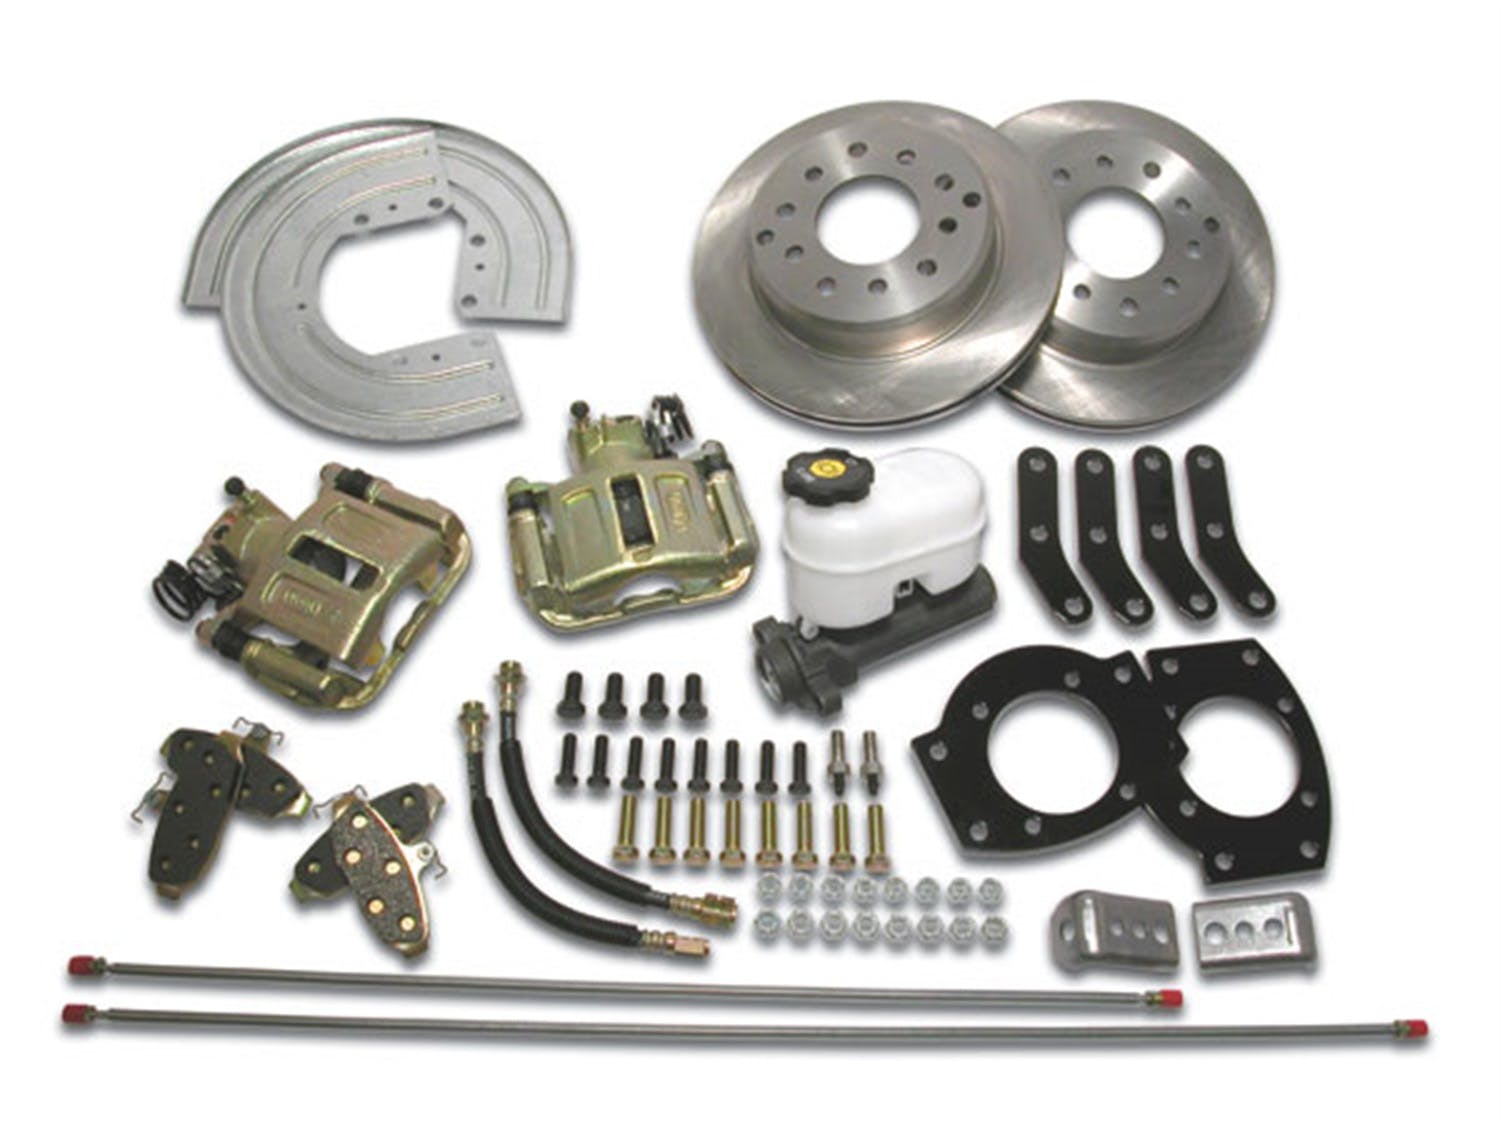 Stainless Steel Brakes A126-51BK Kit A126-51 w/black calipers